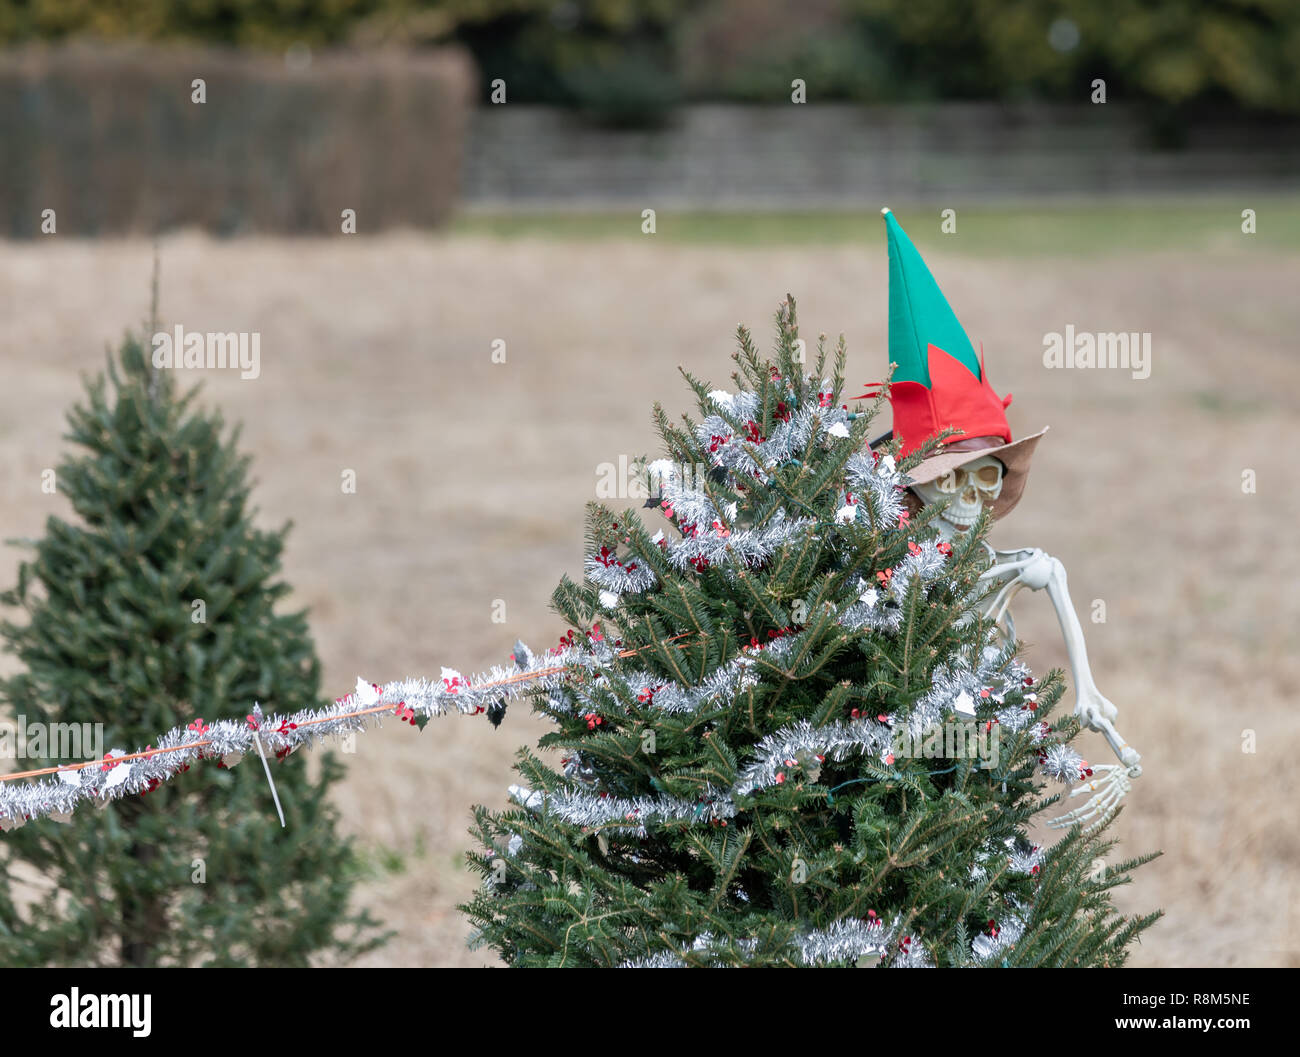 Skeleton dressed up like an elf decorating a Christmas tree Stock Photo